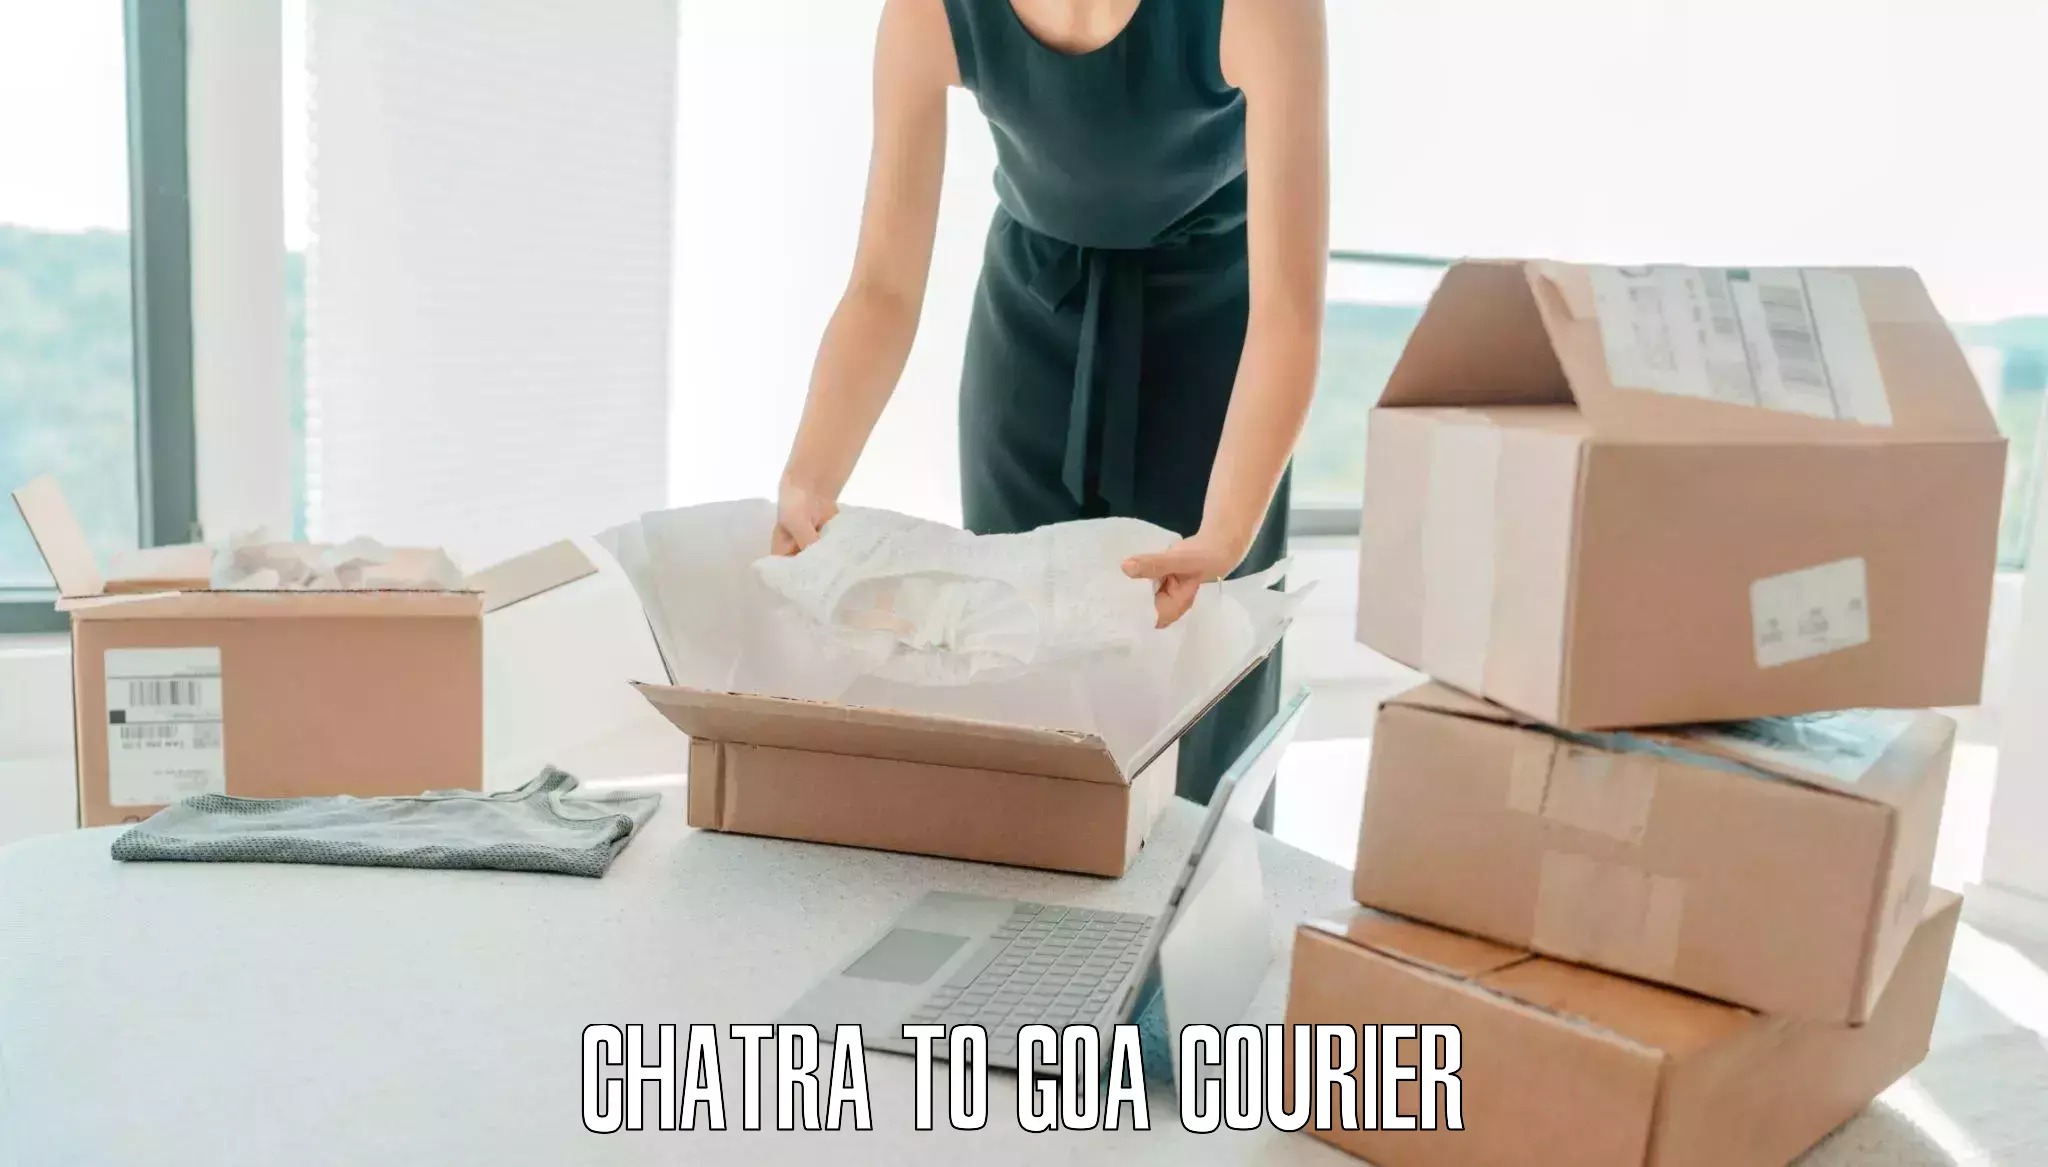 Emergency baggage service Chatra to Goa